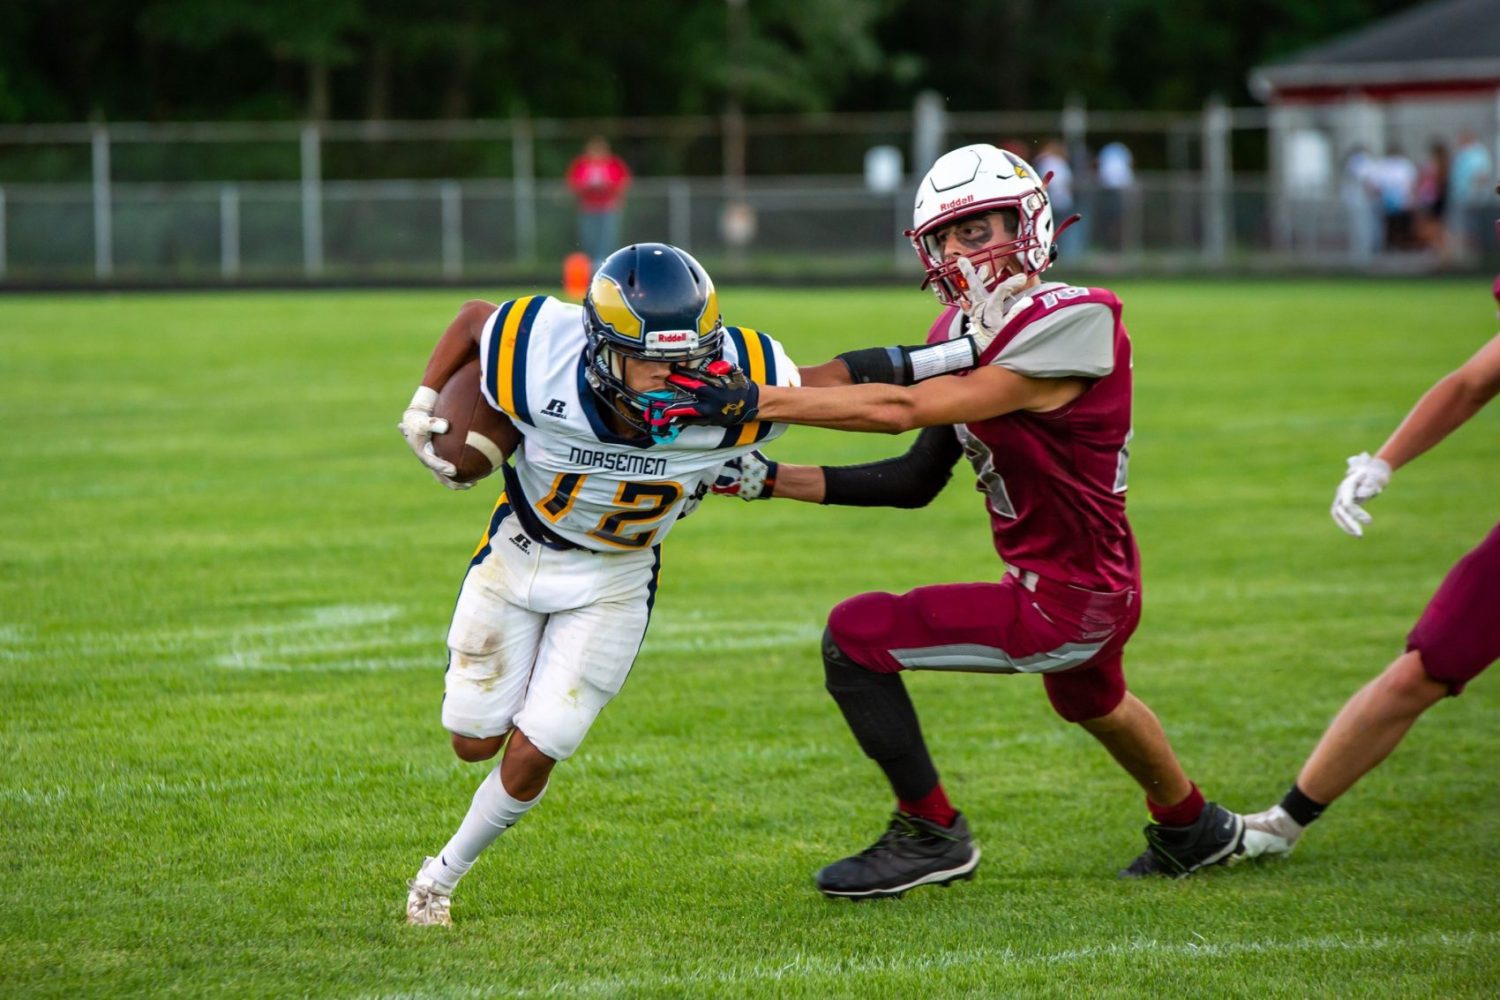 North Muskegon routs Orchard View 55-0 in West Michigan Conference game